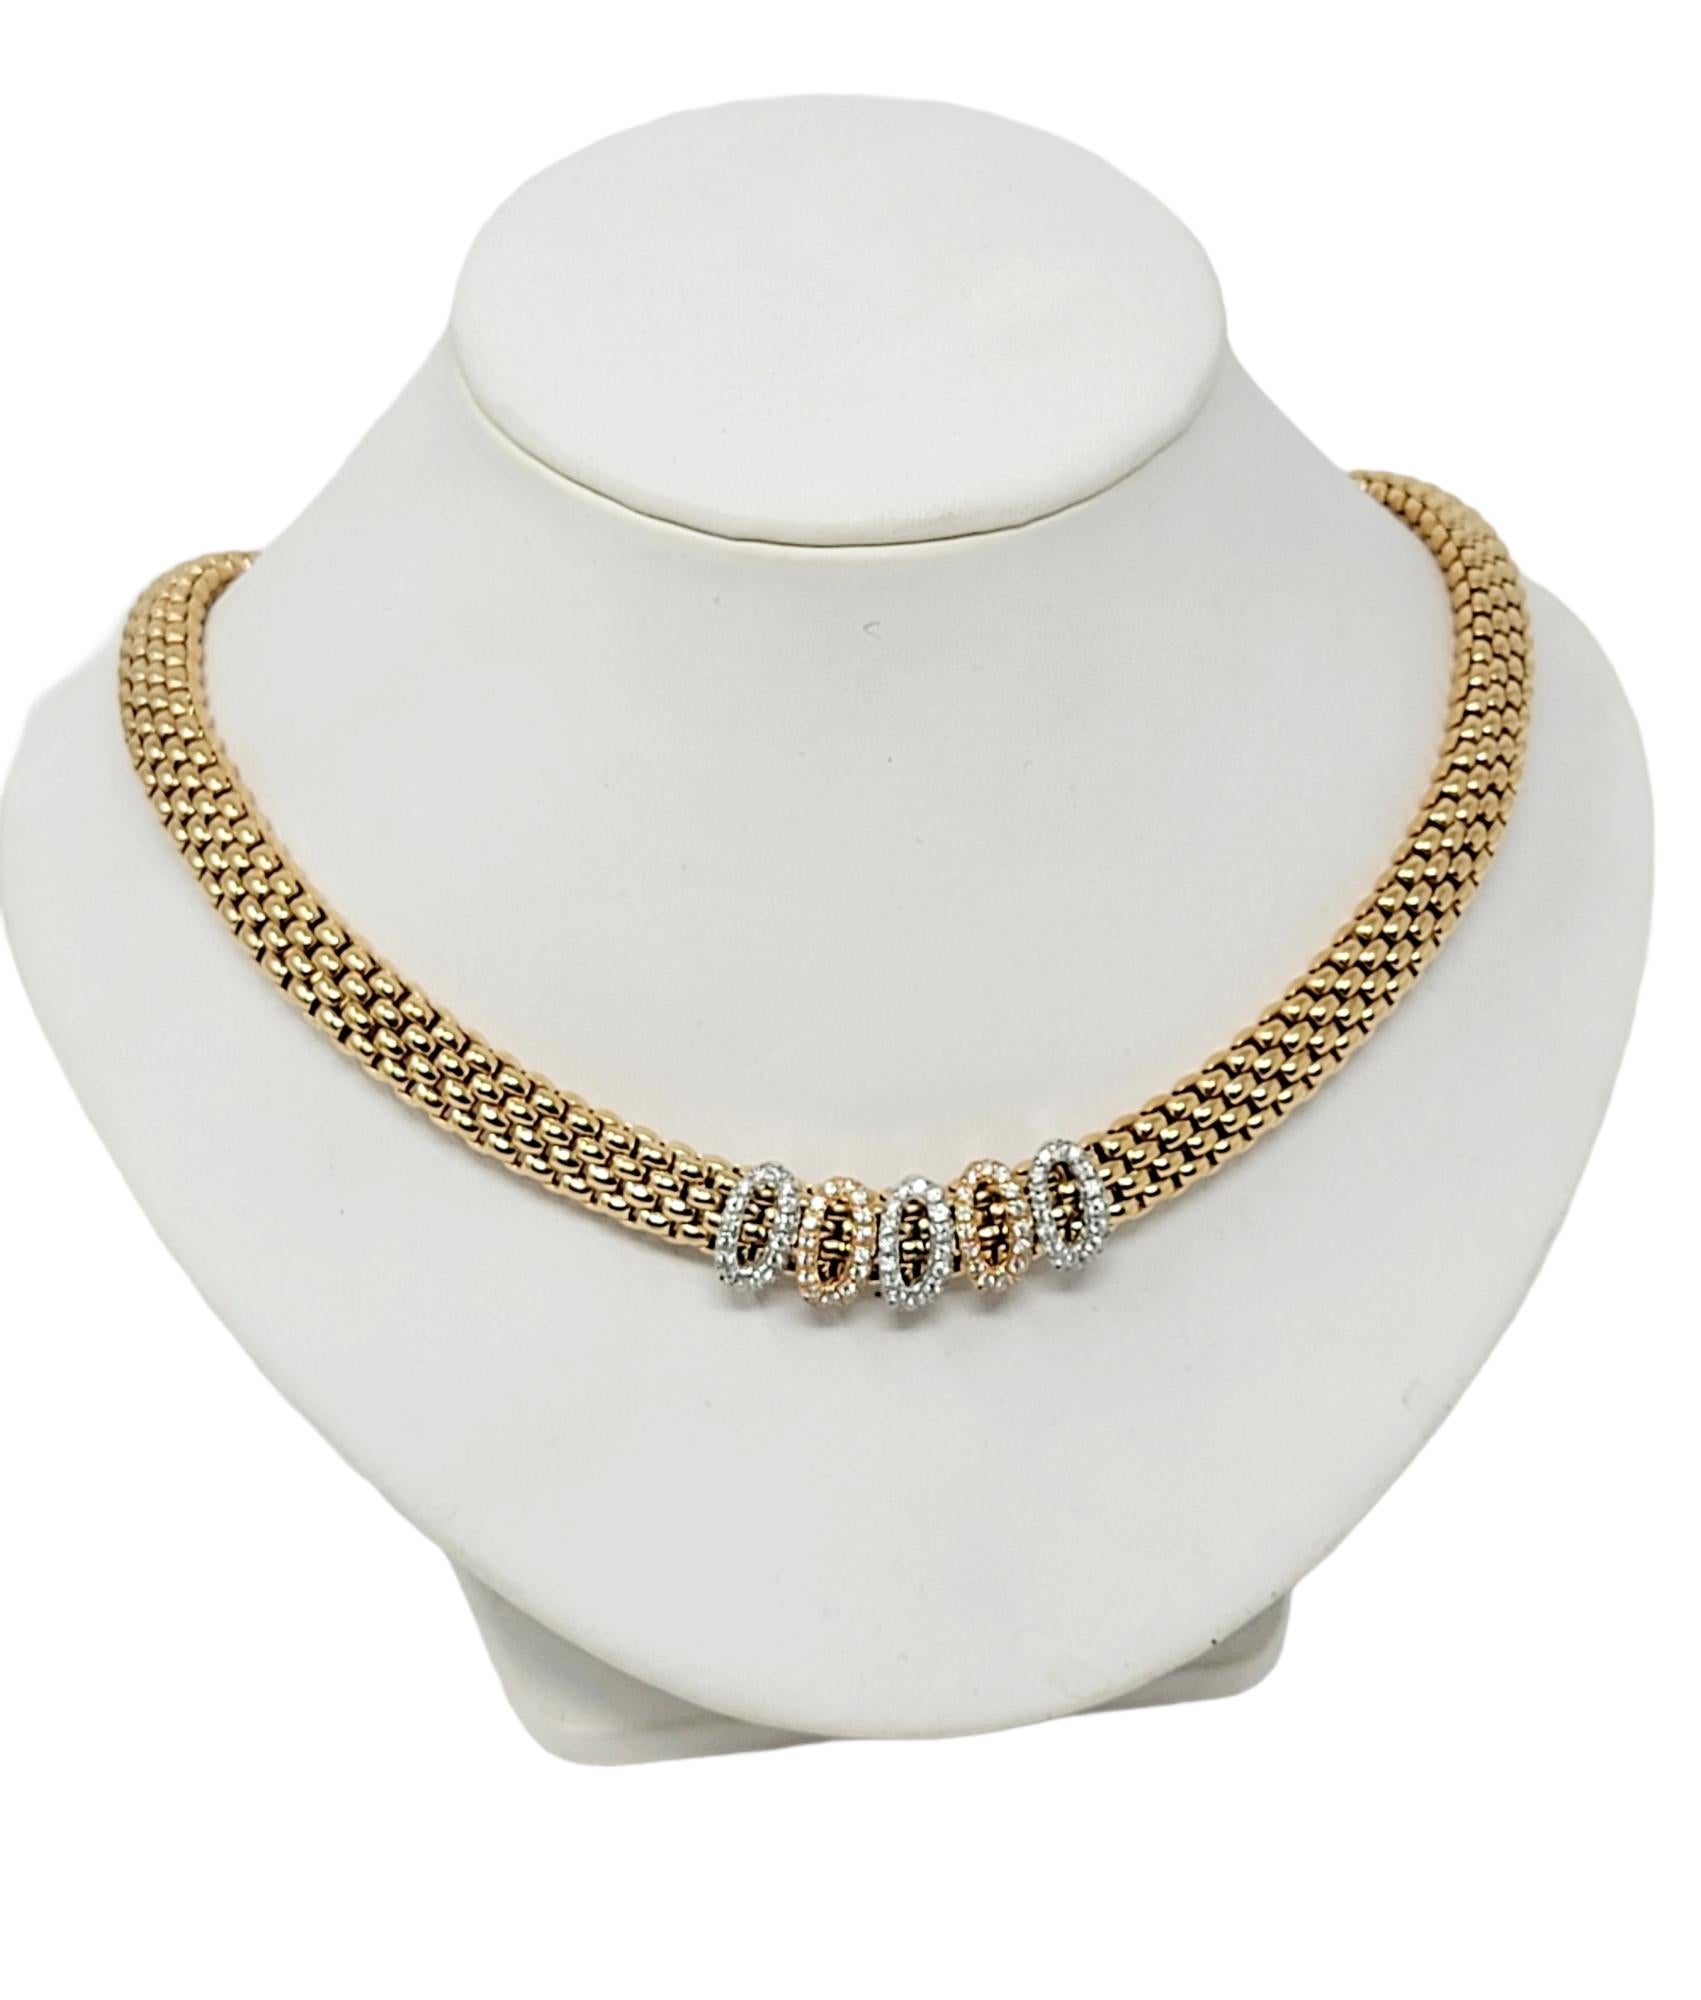 Brighten up your neck with this gorgeous glittering pave diamond station necklace by FOPE. Featuring 100 shimmering diamonds and a multi-tone gold setting, the flexible mesh design of this beautiful piece offers a comfortable elegance that sparkles